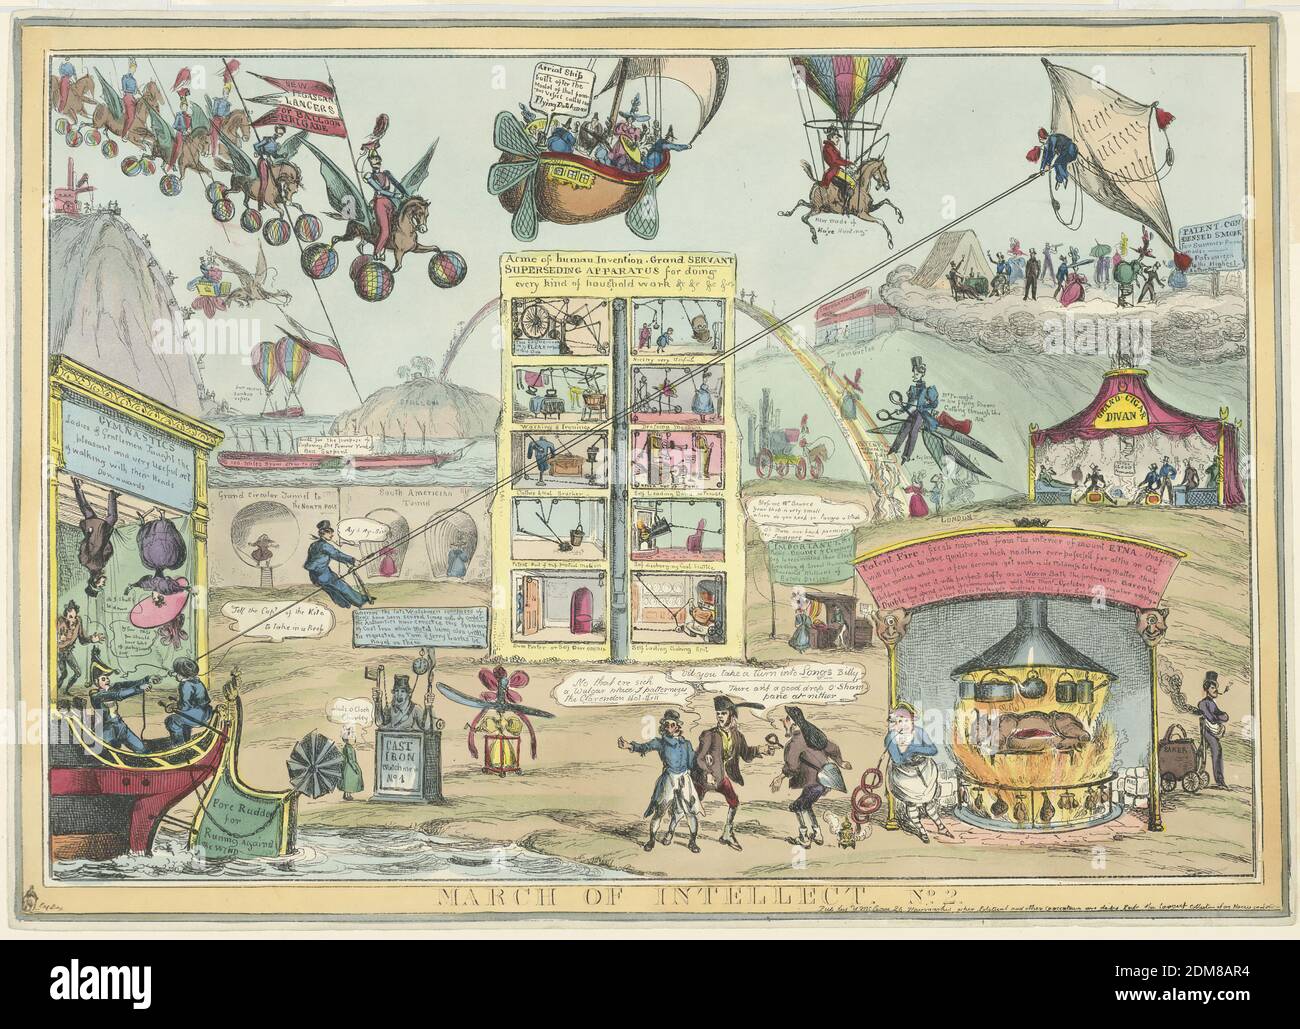 March of Intellect No. 2, William Heath, British, 1794 - 1840, T. McLean, London, England, Engraving, brush and watercolor on paper, Cartoon showing other fantastical means of surface and air transportation than are seen in -84, including a balloon brigade, and a roasting spit with fire provided from Mount Etna. Below, title and publisher's name., England, 1828, Print Stock Photo